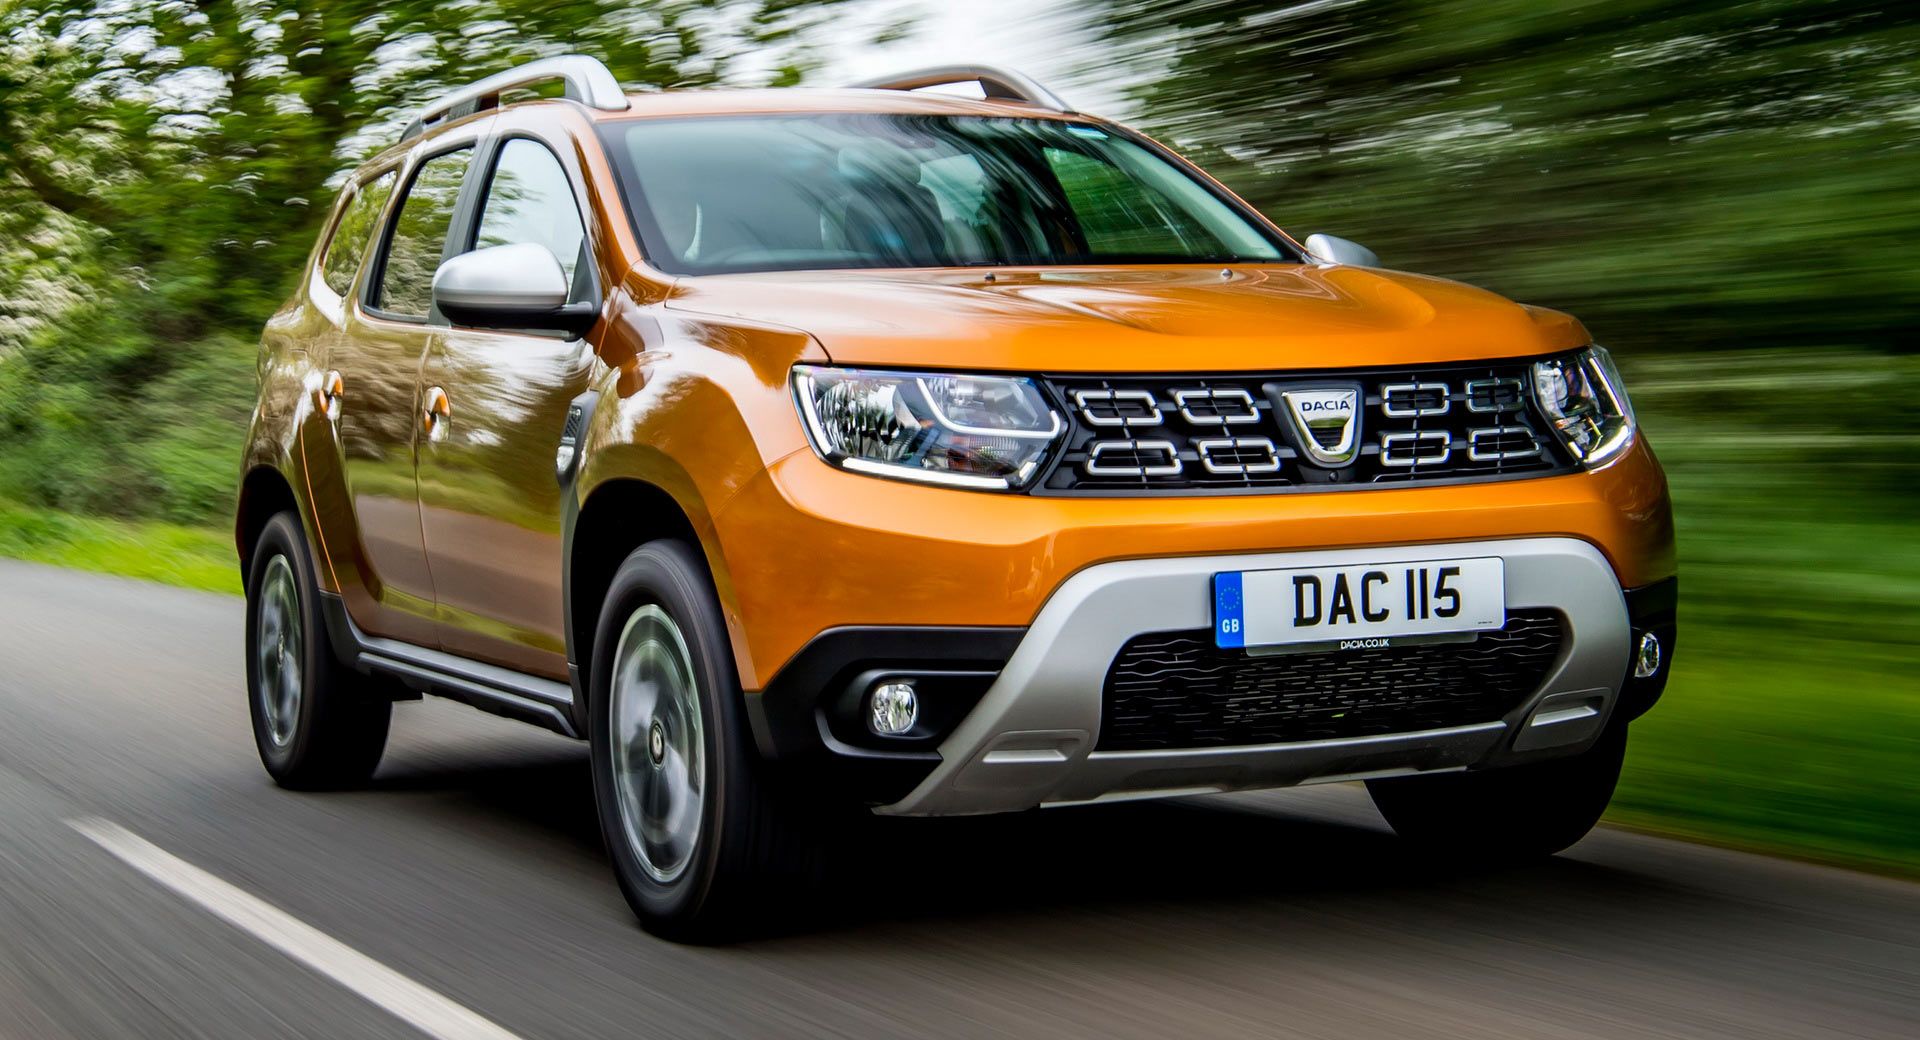  New  Dacia  Duster  Remains The Most Affordable SUV In The UK 